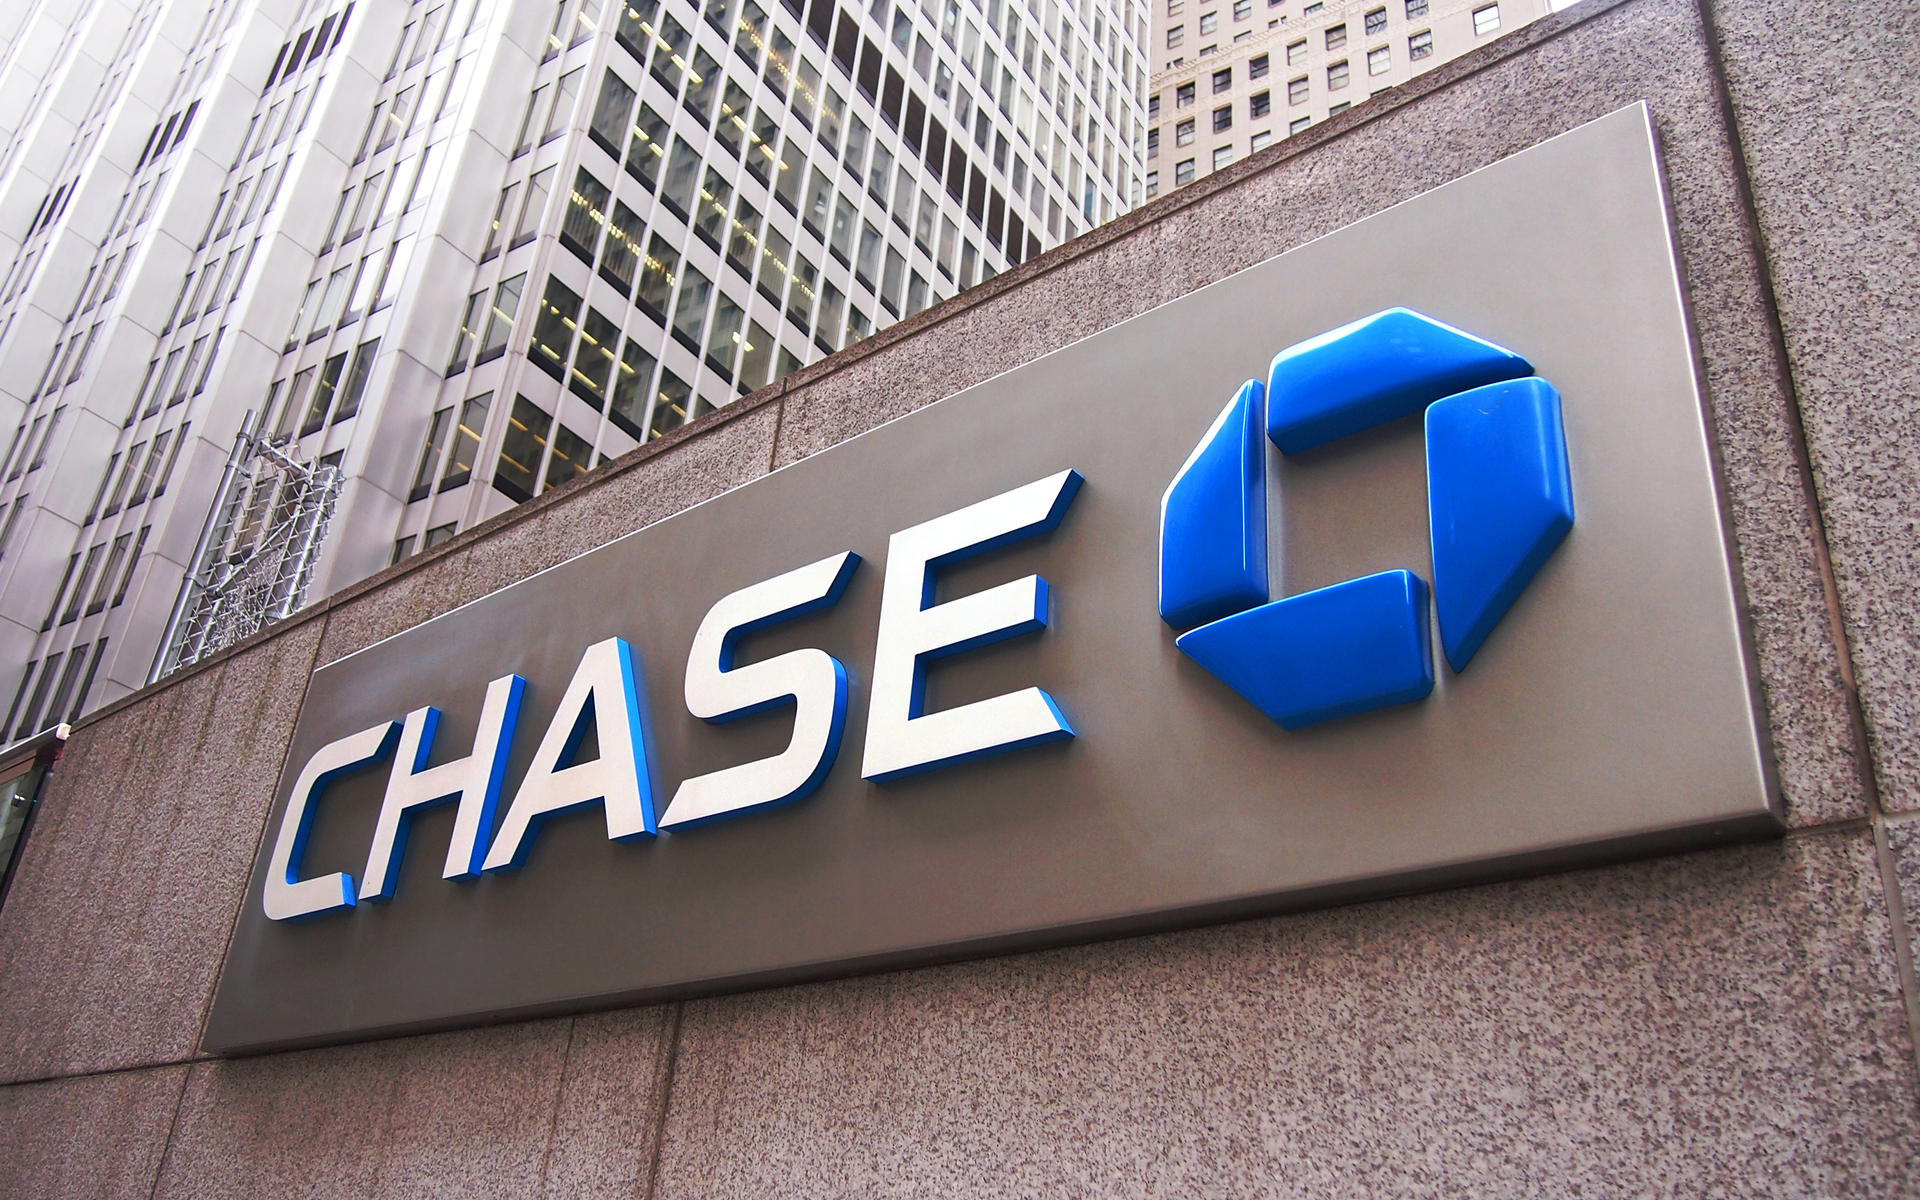 Chase Bank to Settle Crypto Lawsuit By May 2020